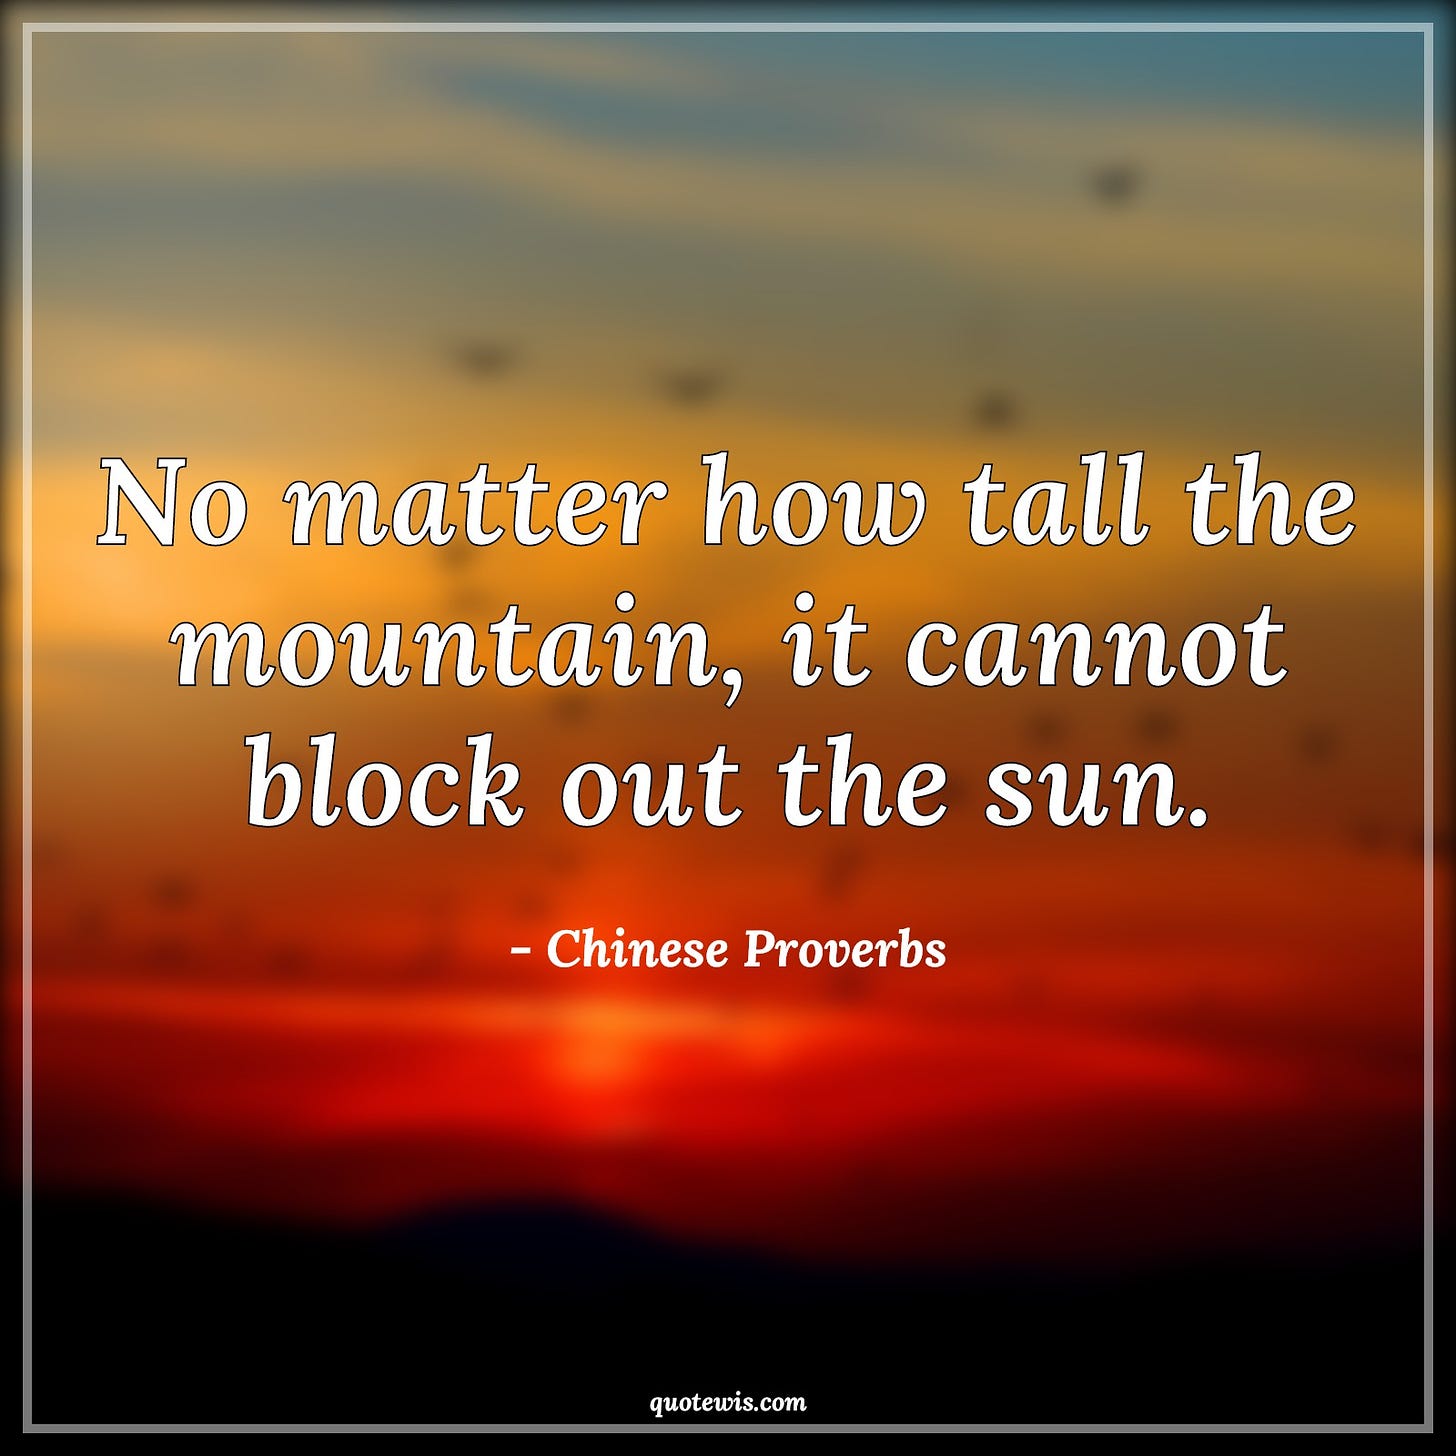 No matter how tall the mountain, it cannot block out the sun. - Chinese Proverbs Quotes | 